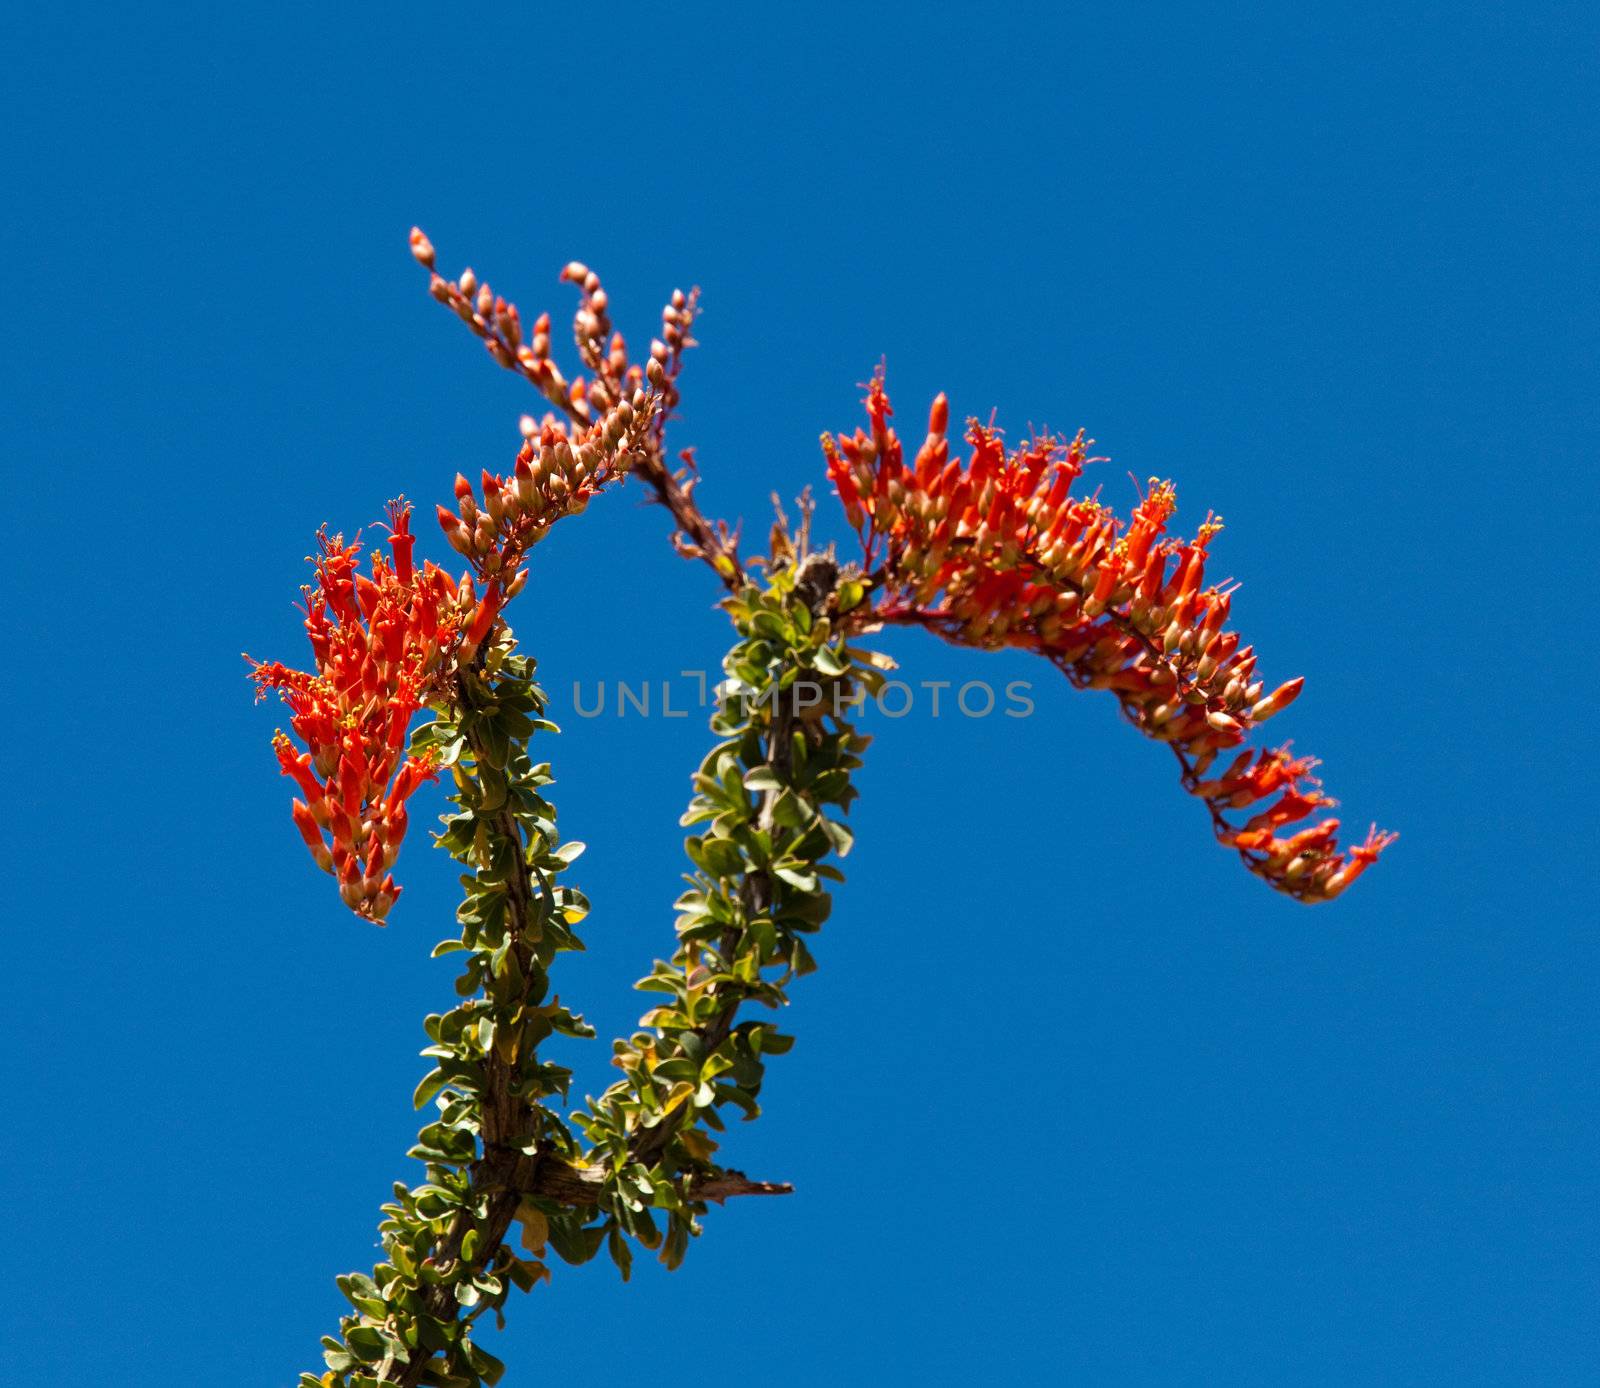 Crimson flowers of the Ocotillo cactus by steheap